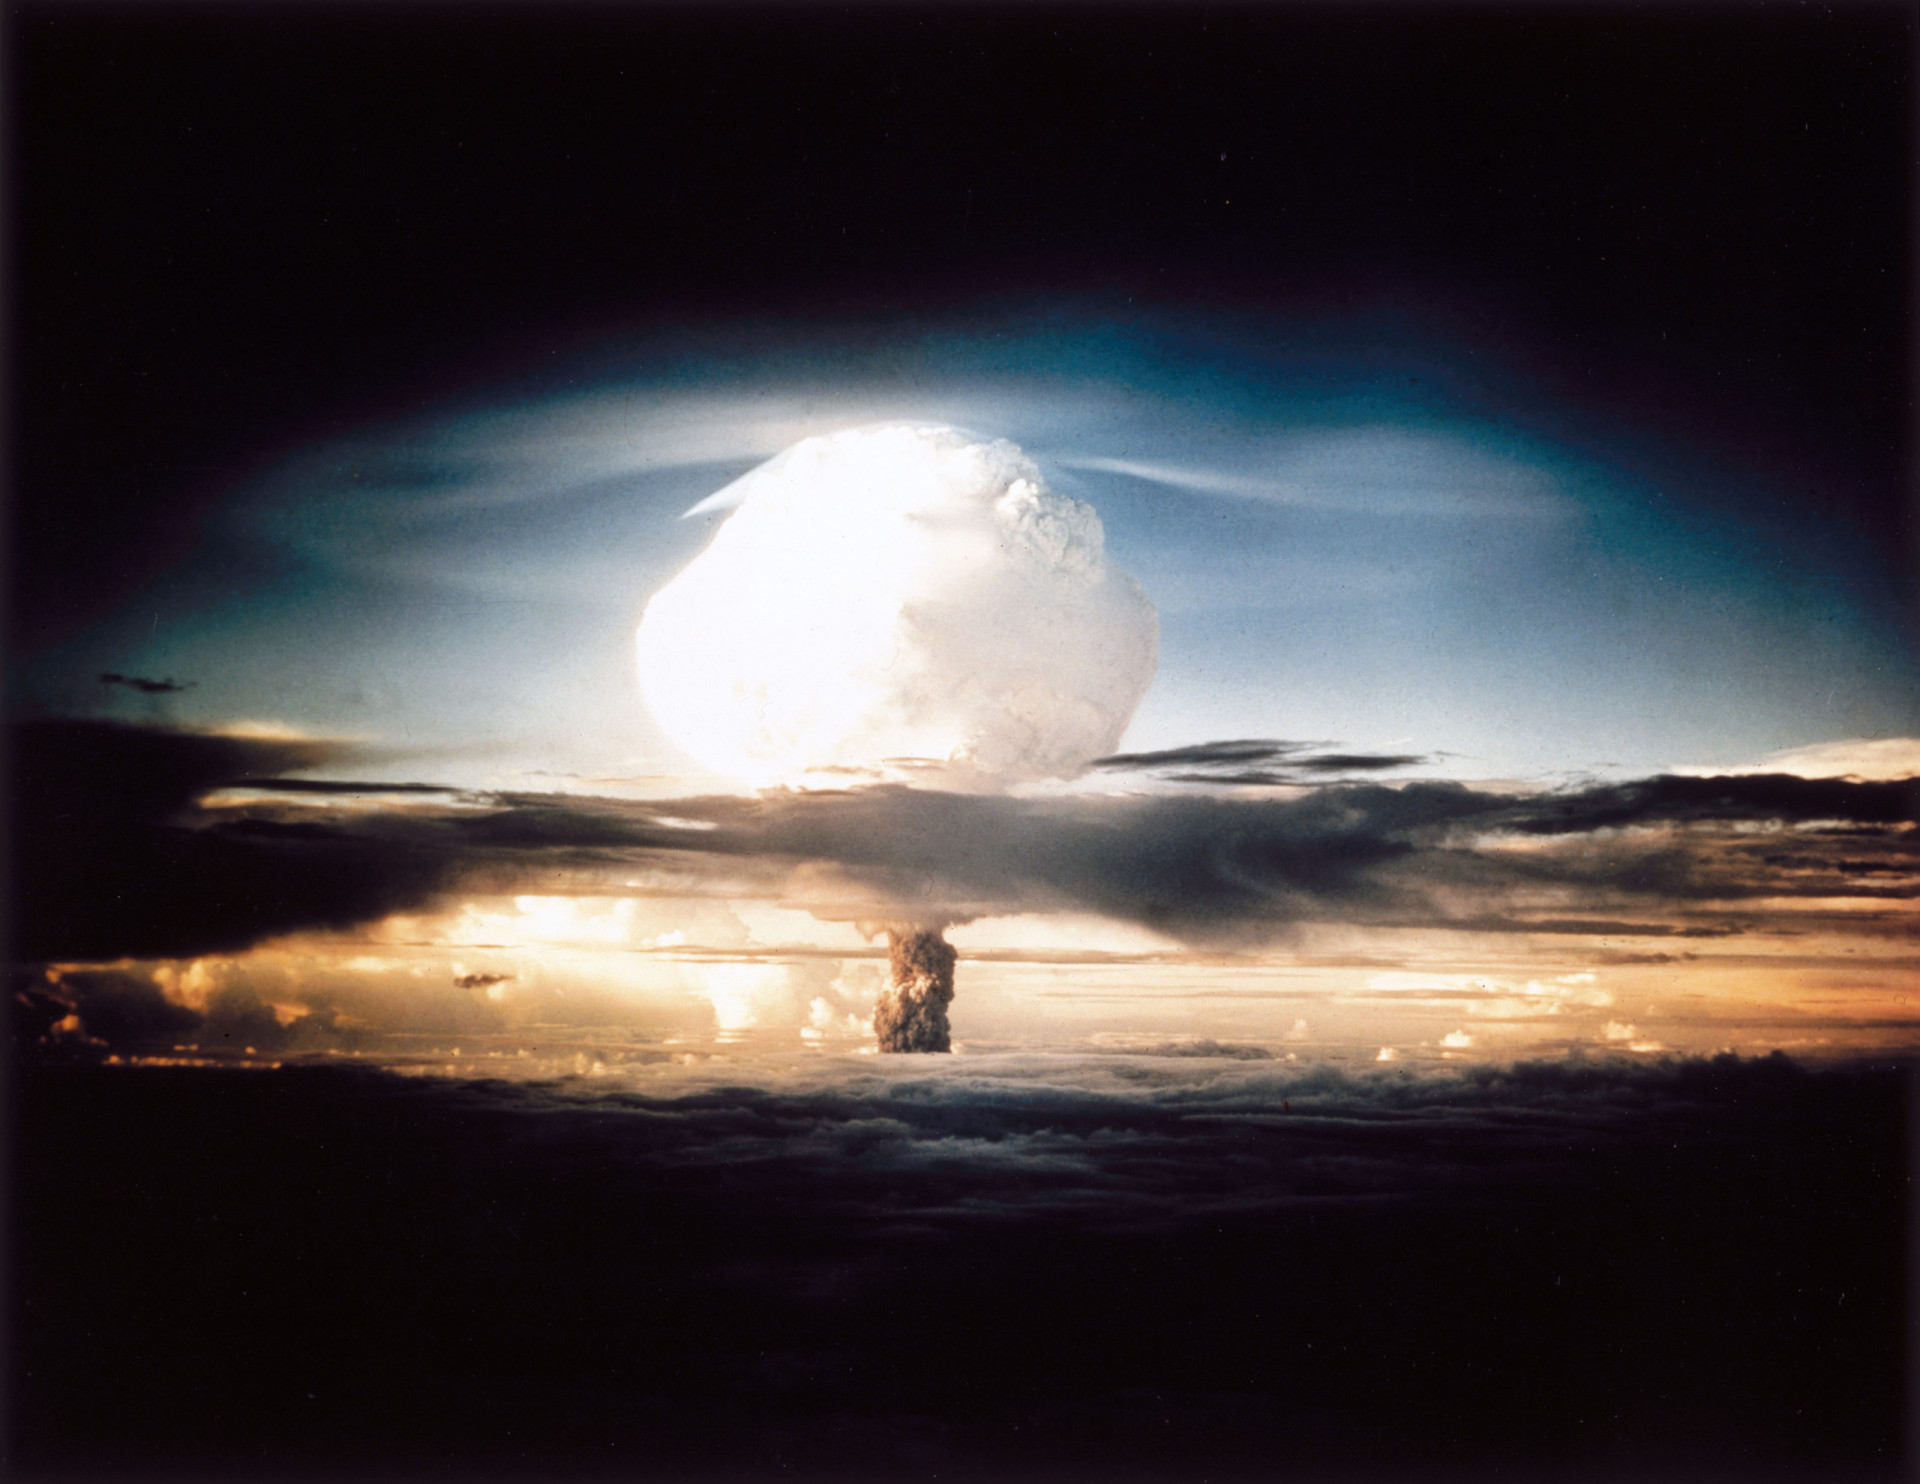 <p>The plan was essentially to detonate a hydrogen bomb on the Moon. Hydrogen bombs were significantly more destructive than the atomic bombs dropped by the US in Japan, and America wanted to show the world exactly how devastating they could be.</p><p><a href="https://www.msn.com/en-ph/community/channel/vid-7xx8mnucu55yw63we9va2gwr7uihbxwc68fxqp25x6tg4ftibpra?cvid=94631541bc0f4f89bfd59158d696ad7e">Follow us and access great exclusive content every day</a></p>